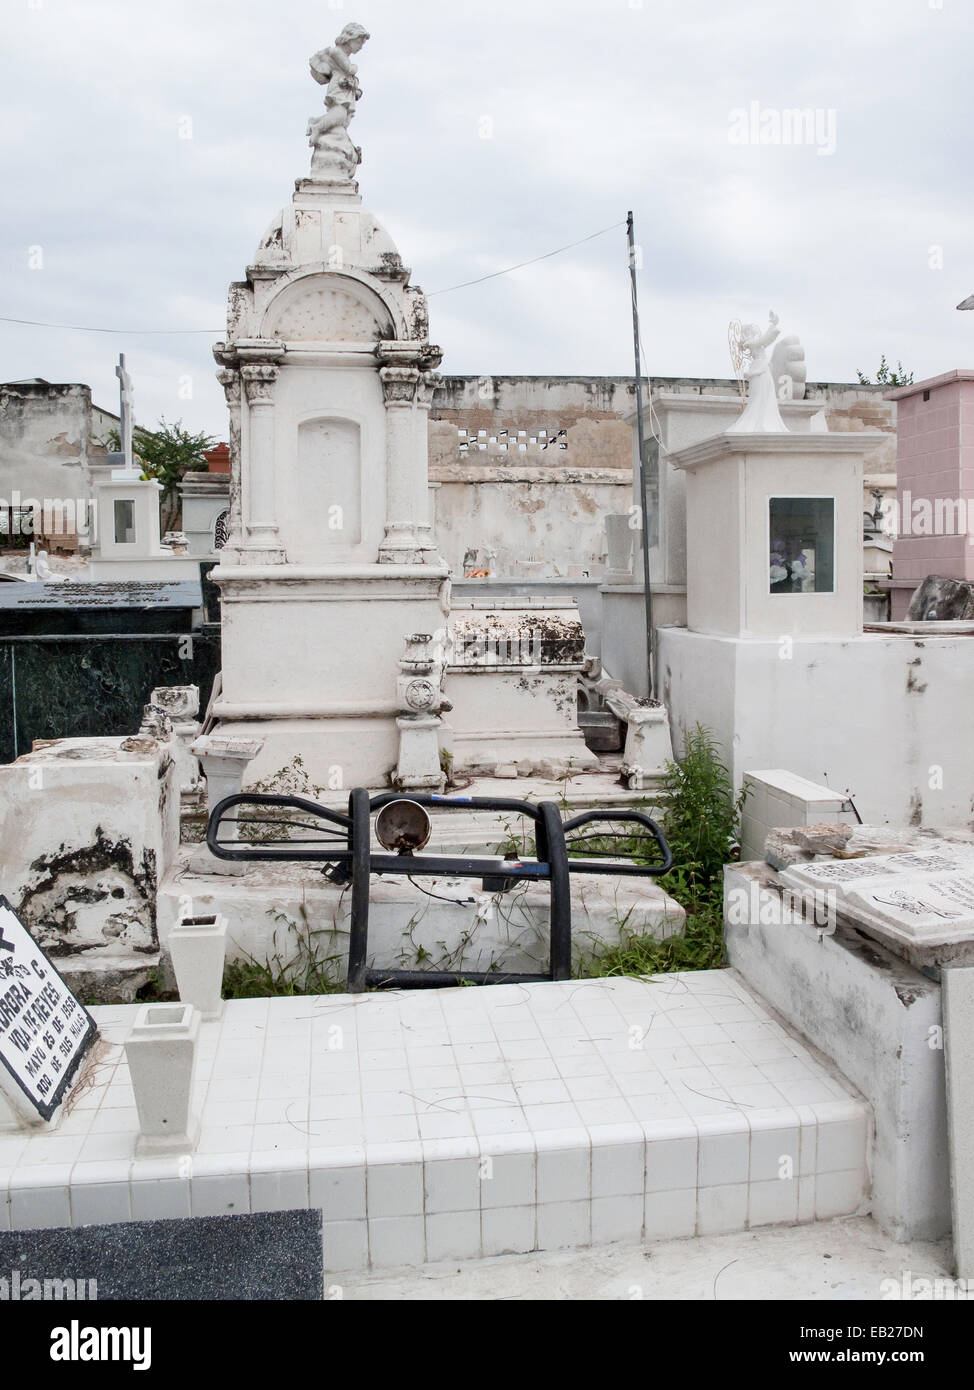 Graveyard with the front grill of an old car placed on a grave, in the Panteon de San Roman cemetery, Campeche, Mexico. Stock Photo